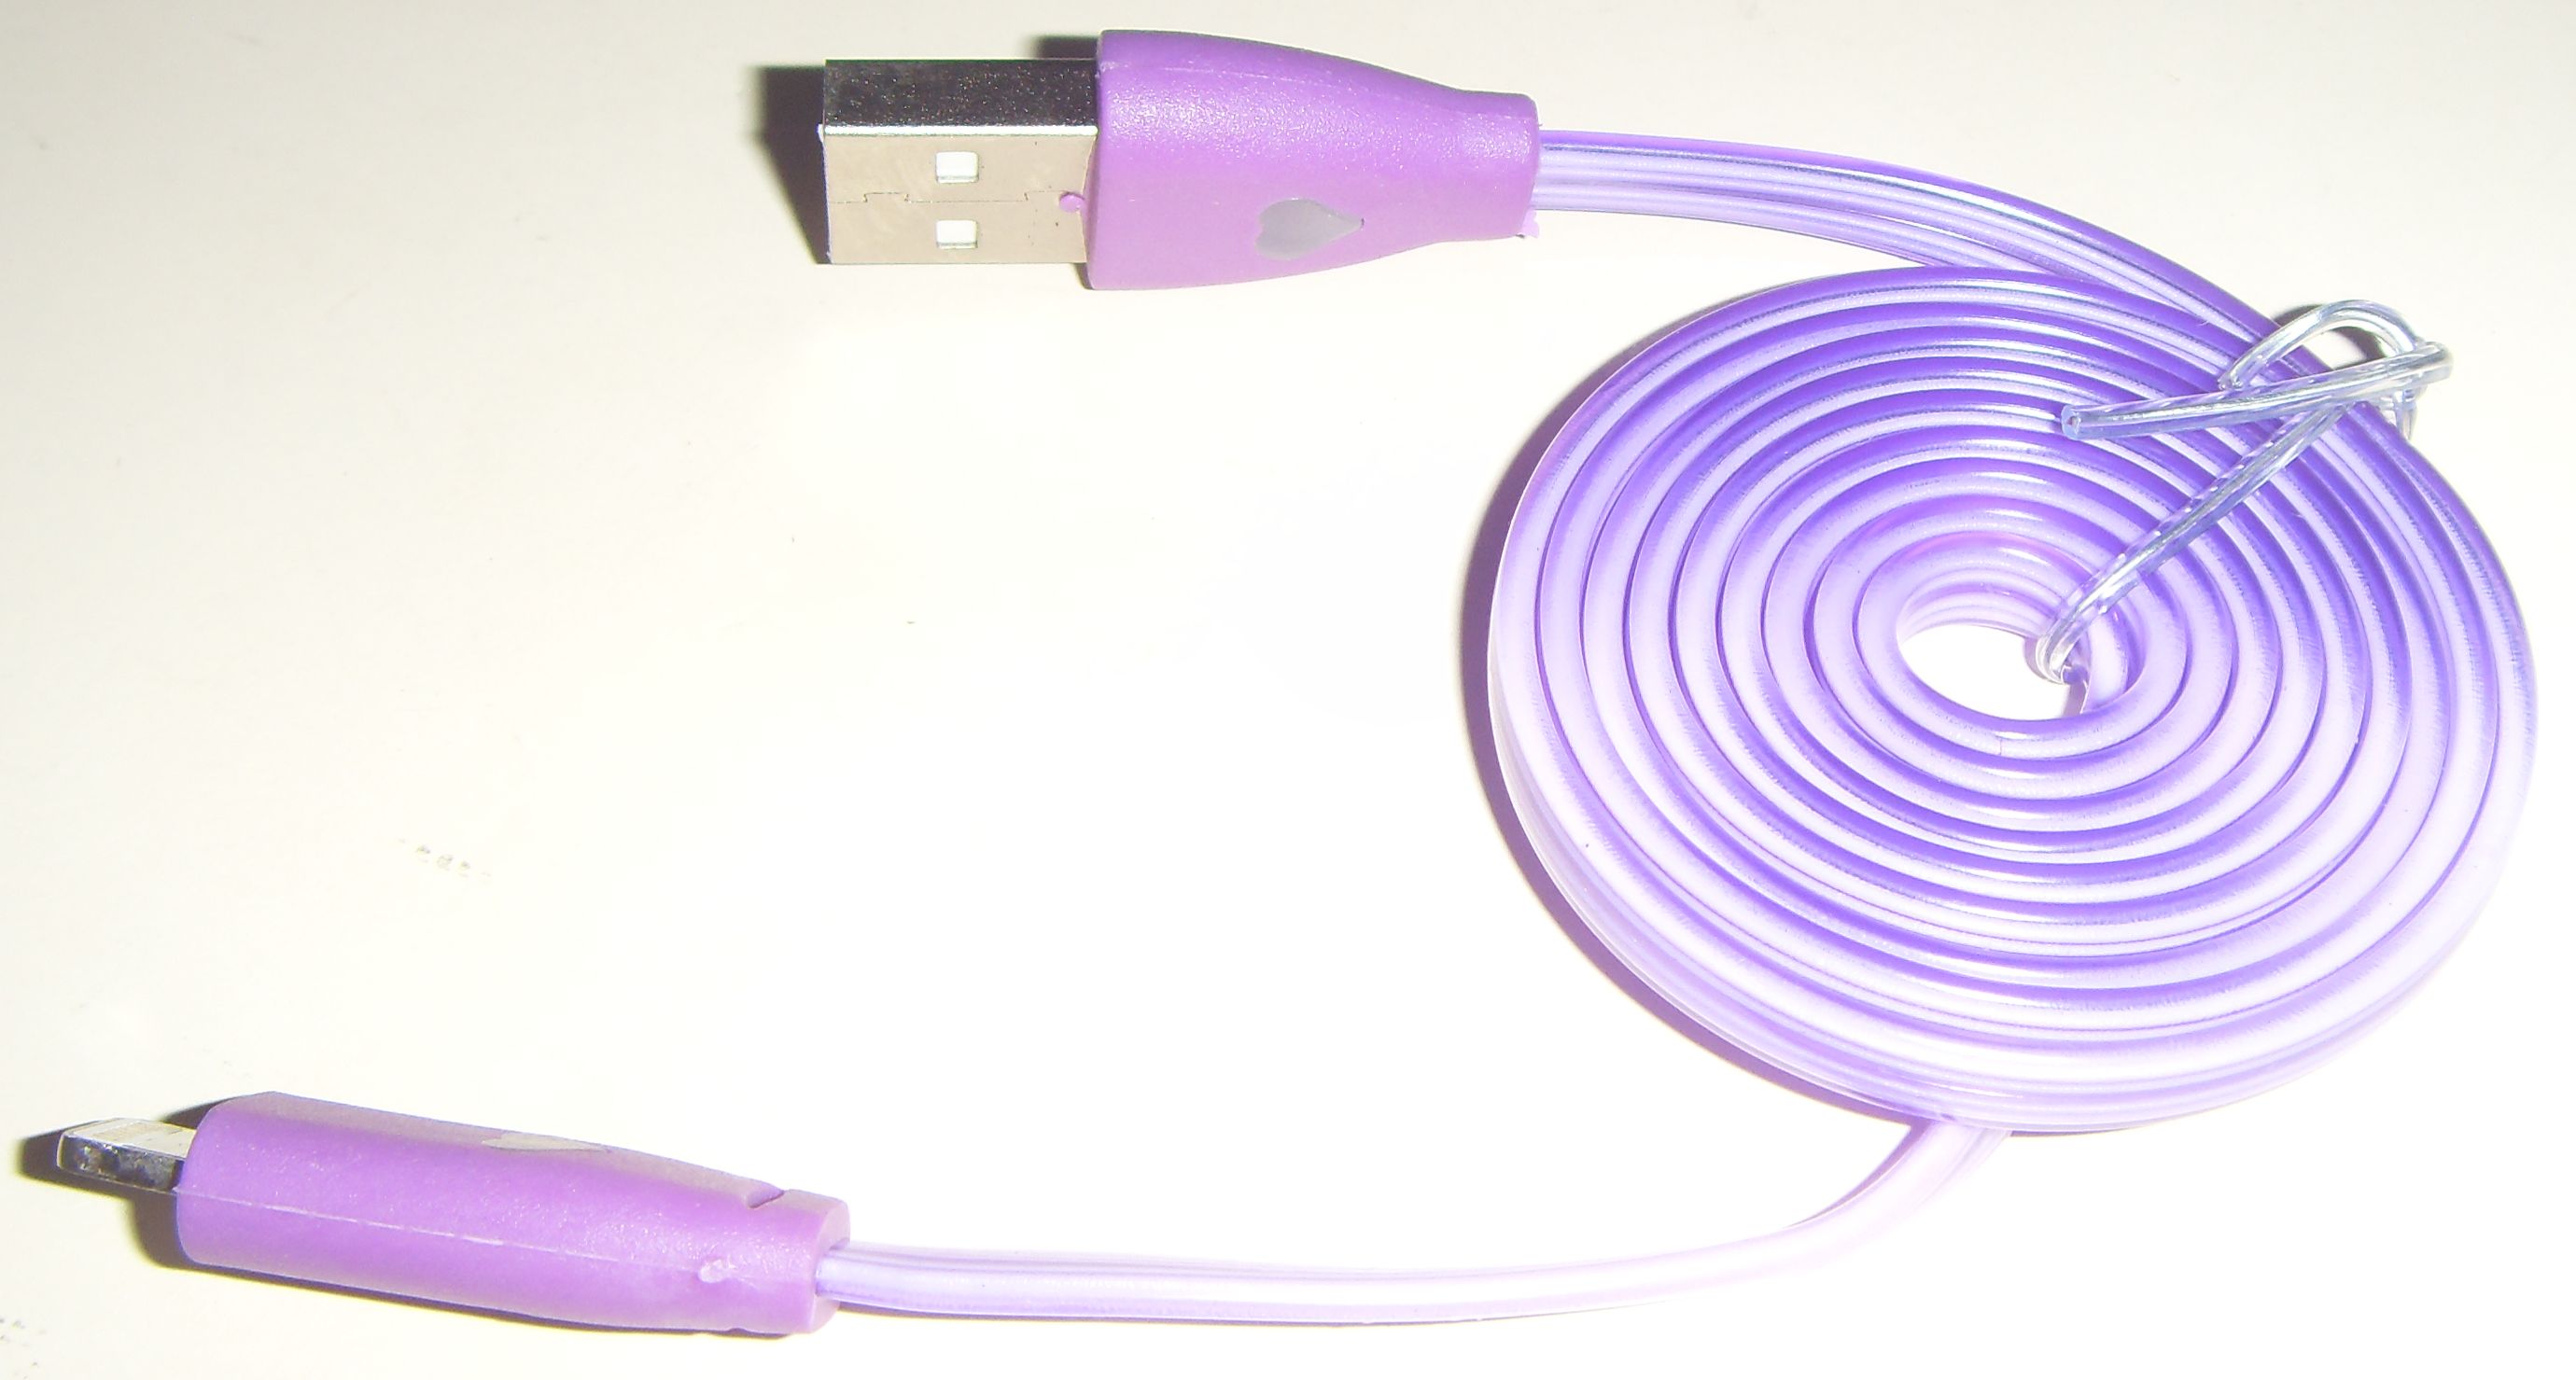 iphone 6 cable (colour changing led light purple).jpg